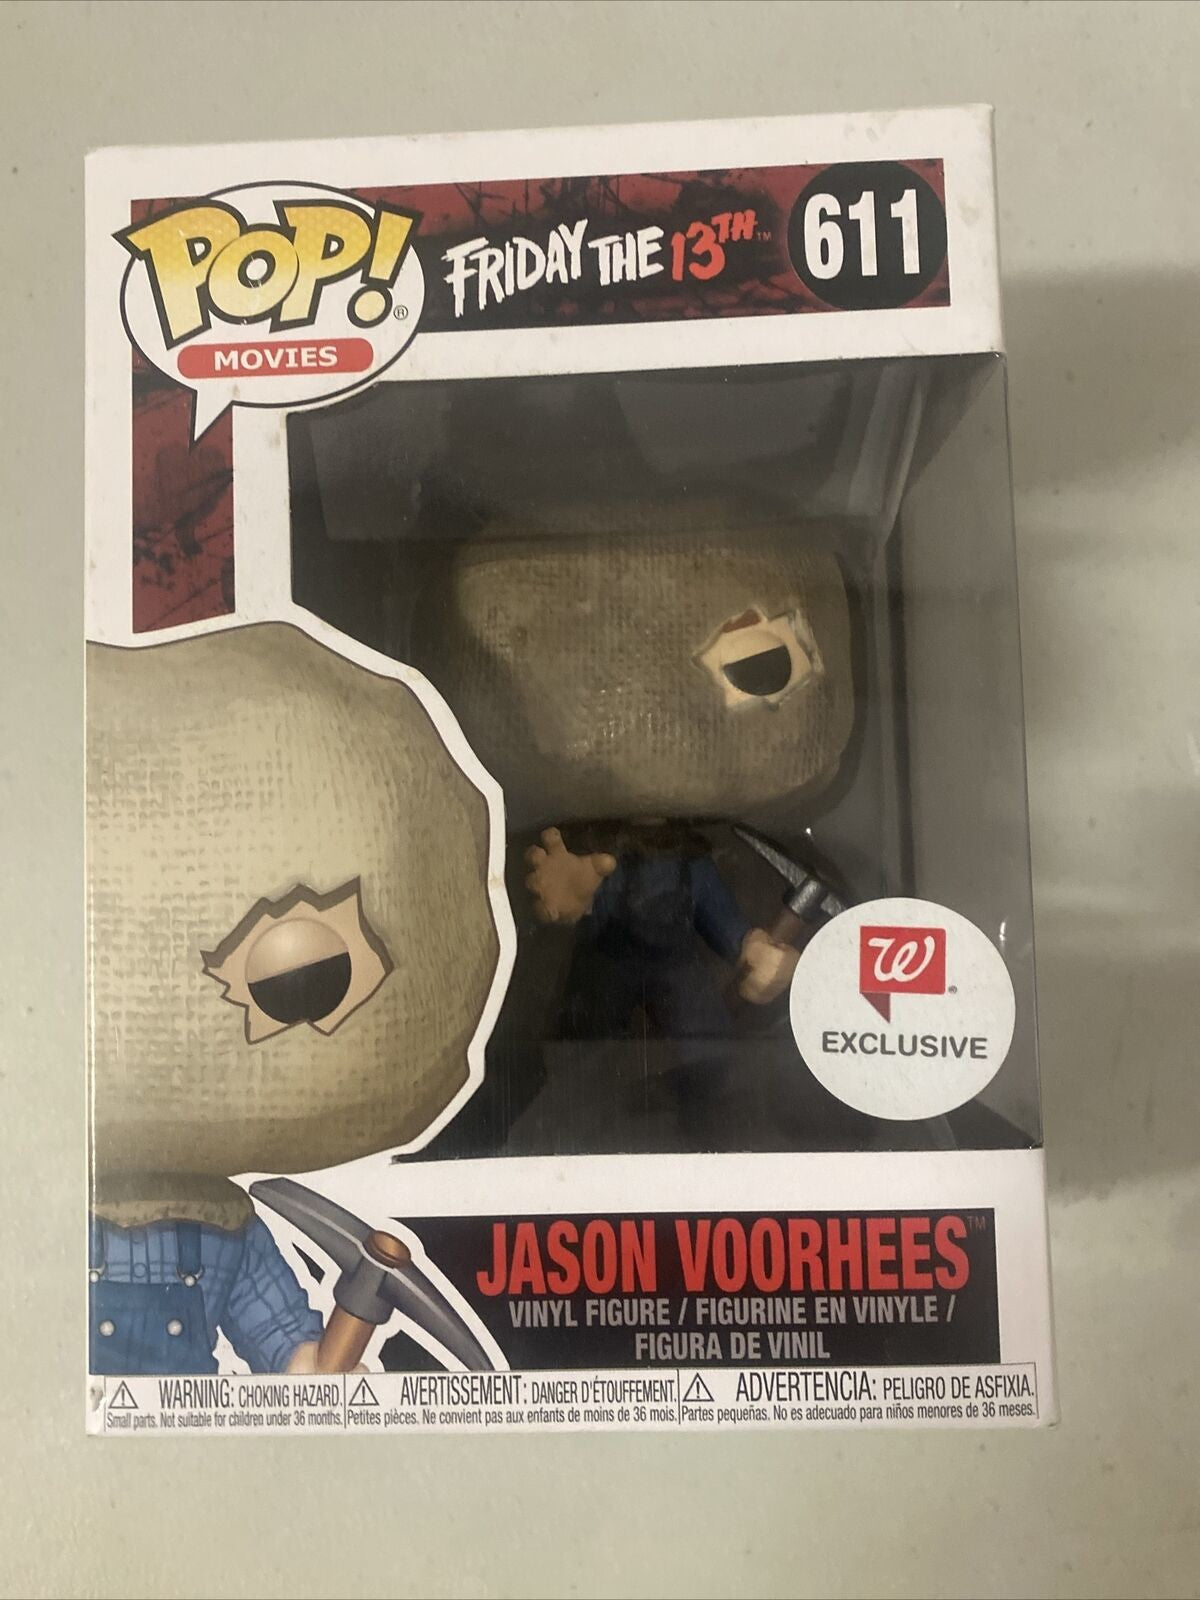 FUNKO POP! #611 Friday The 13th Jason Voorhees